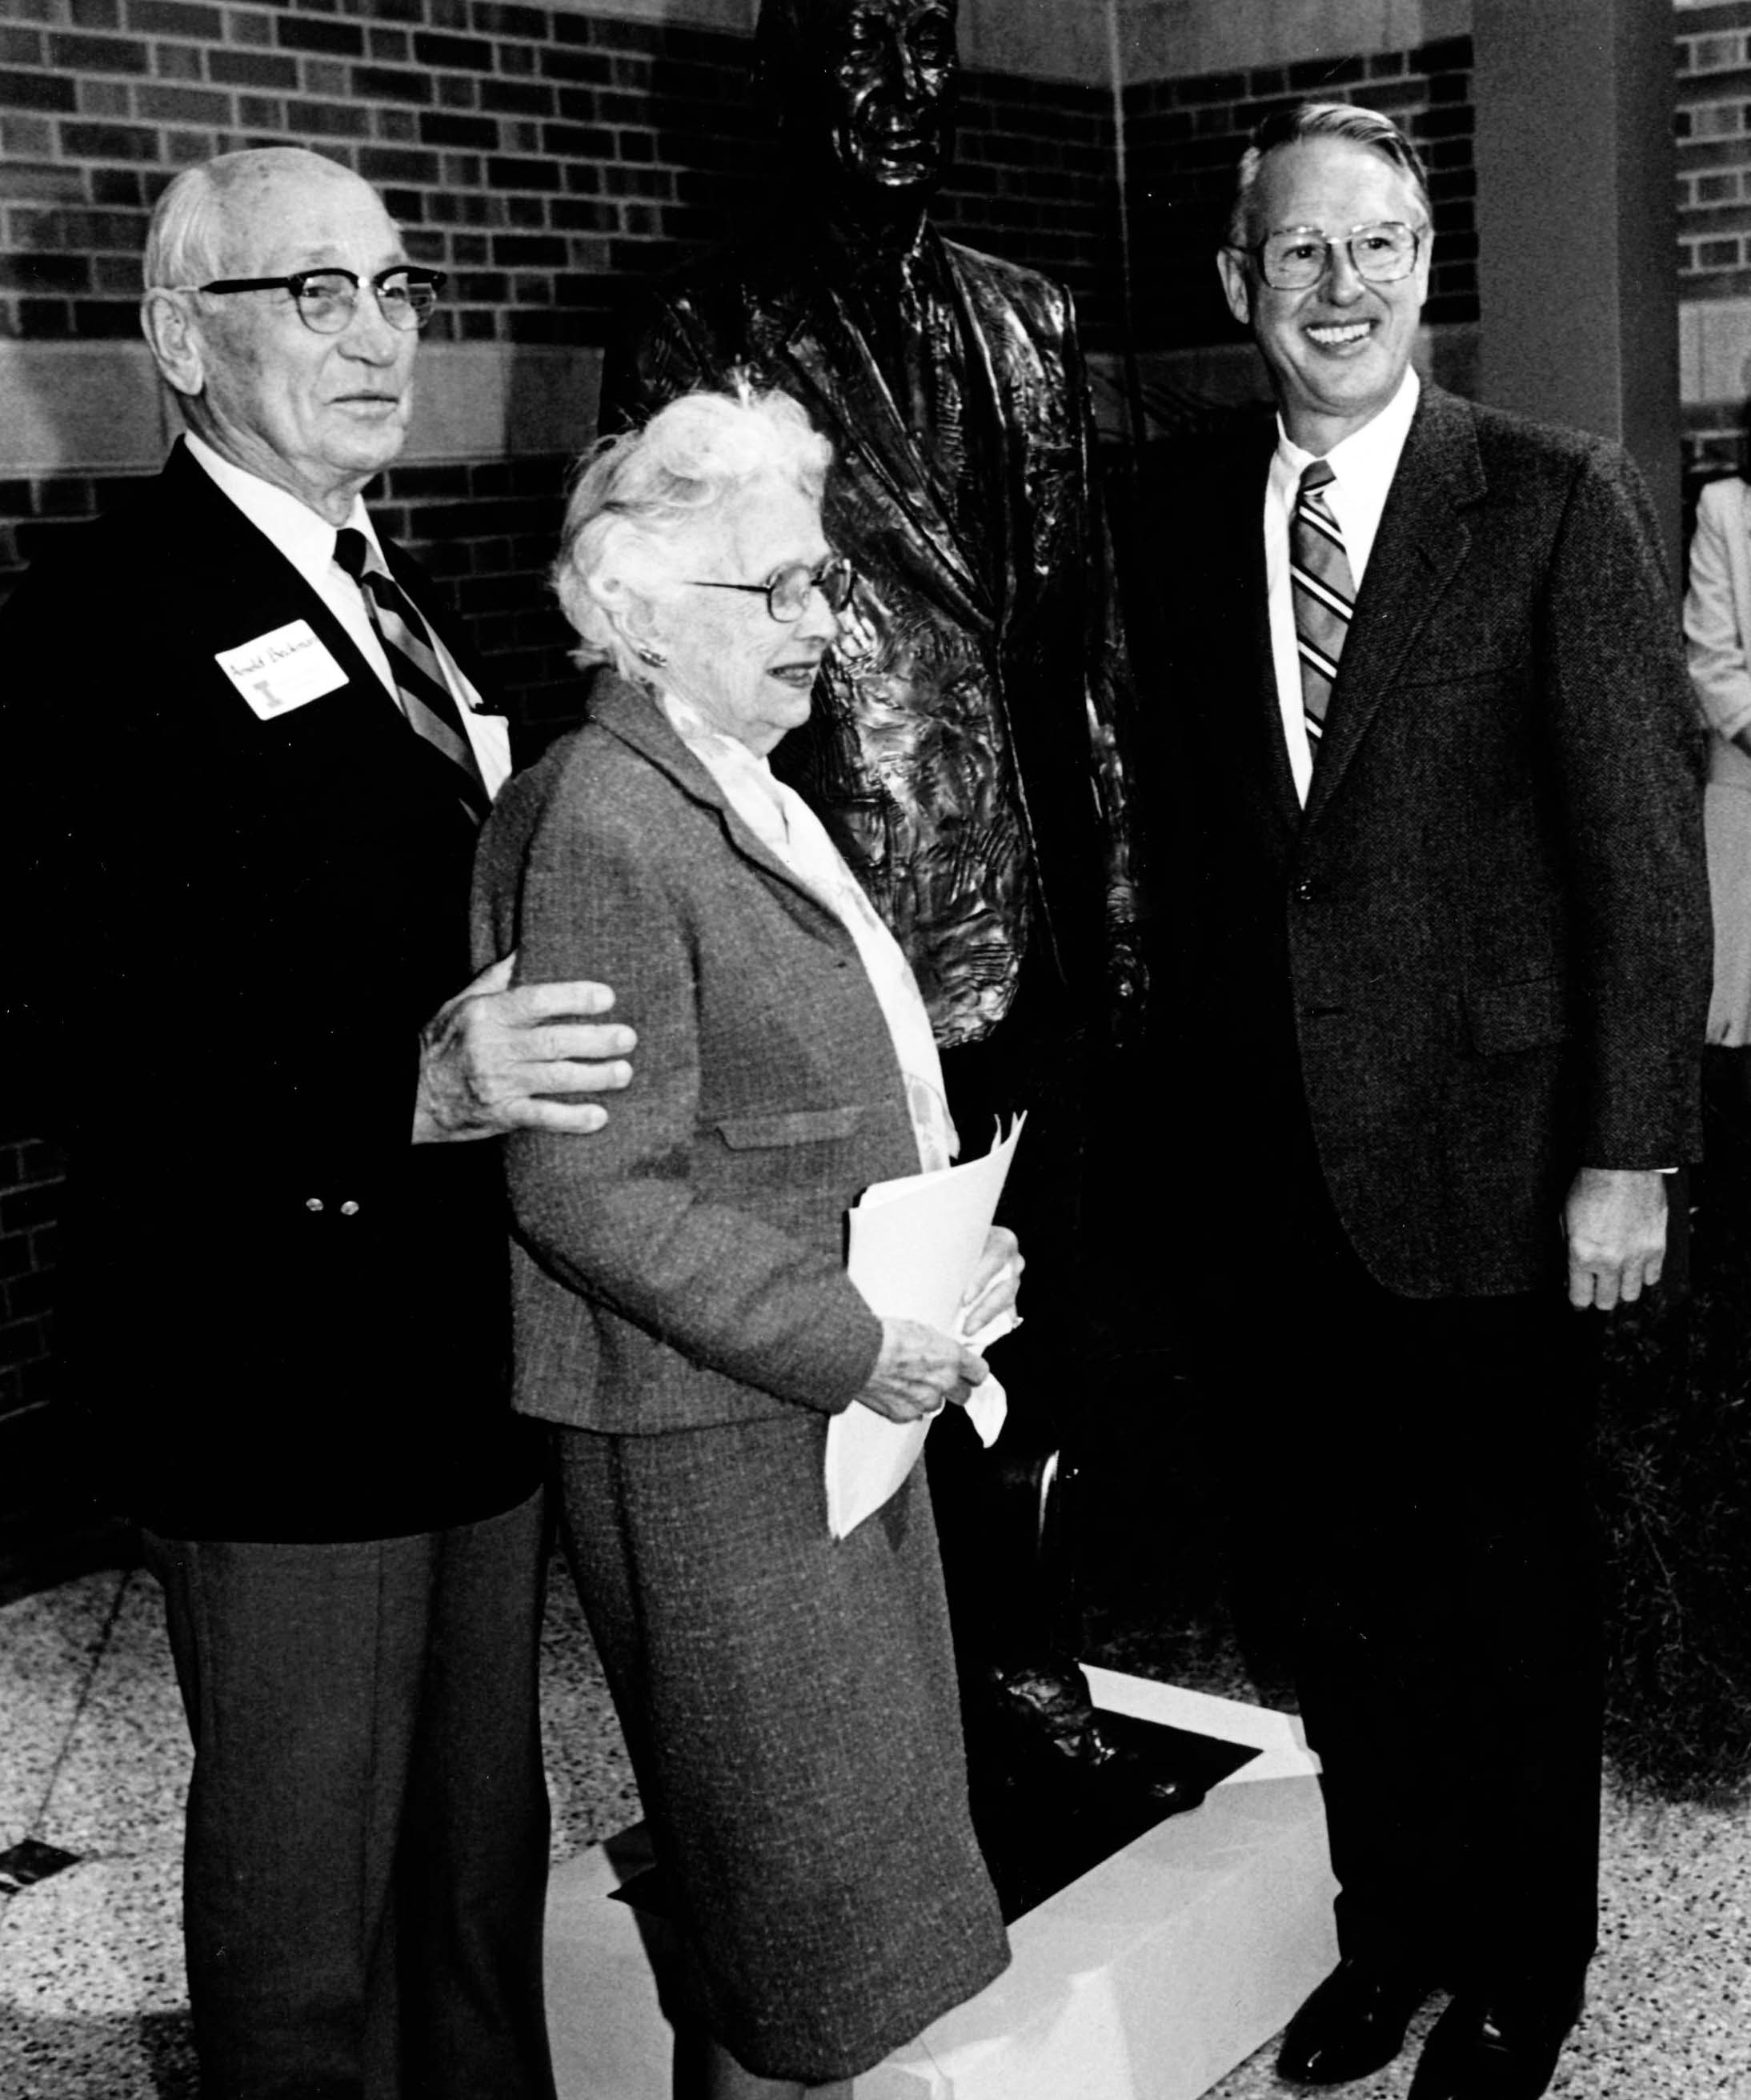 A black-and-white photo depicts Arnold and Mabel Beckman alongside Stanley O. Ikenberry, all posing in front of a bronze statue of Arnold at the Beckman Institute.